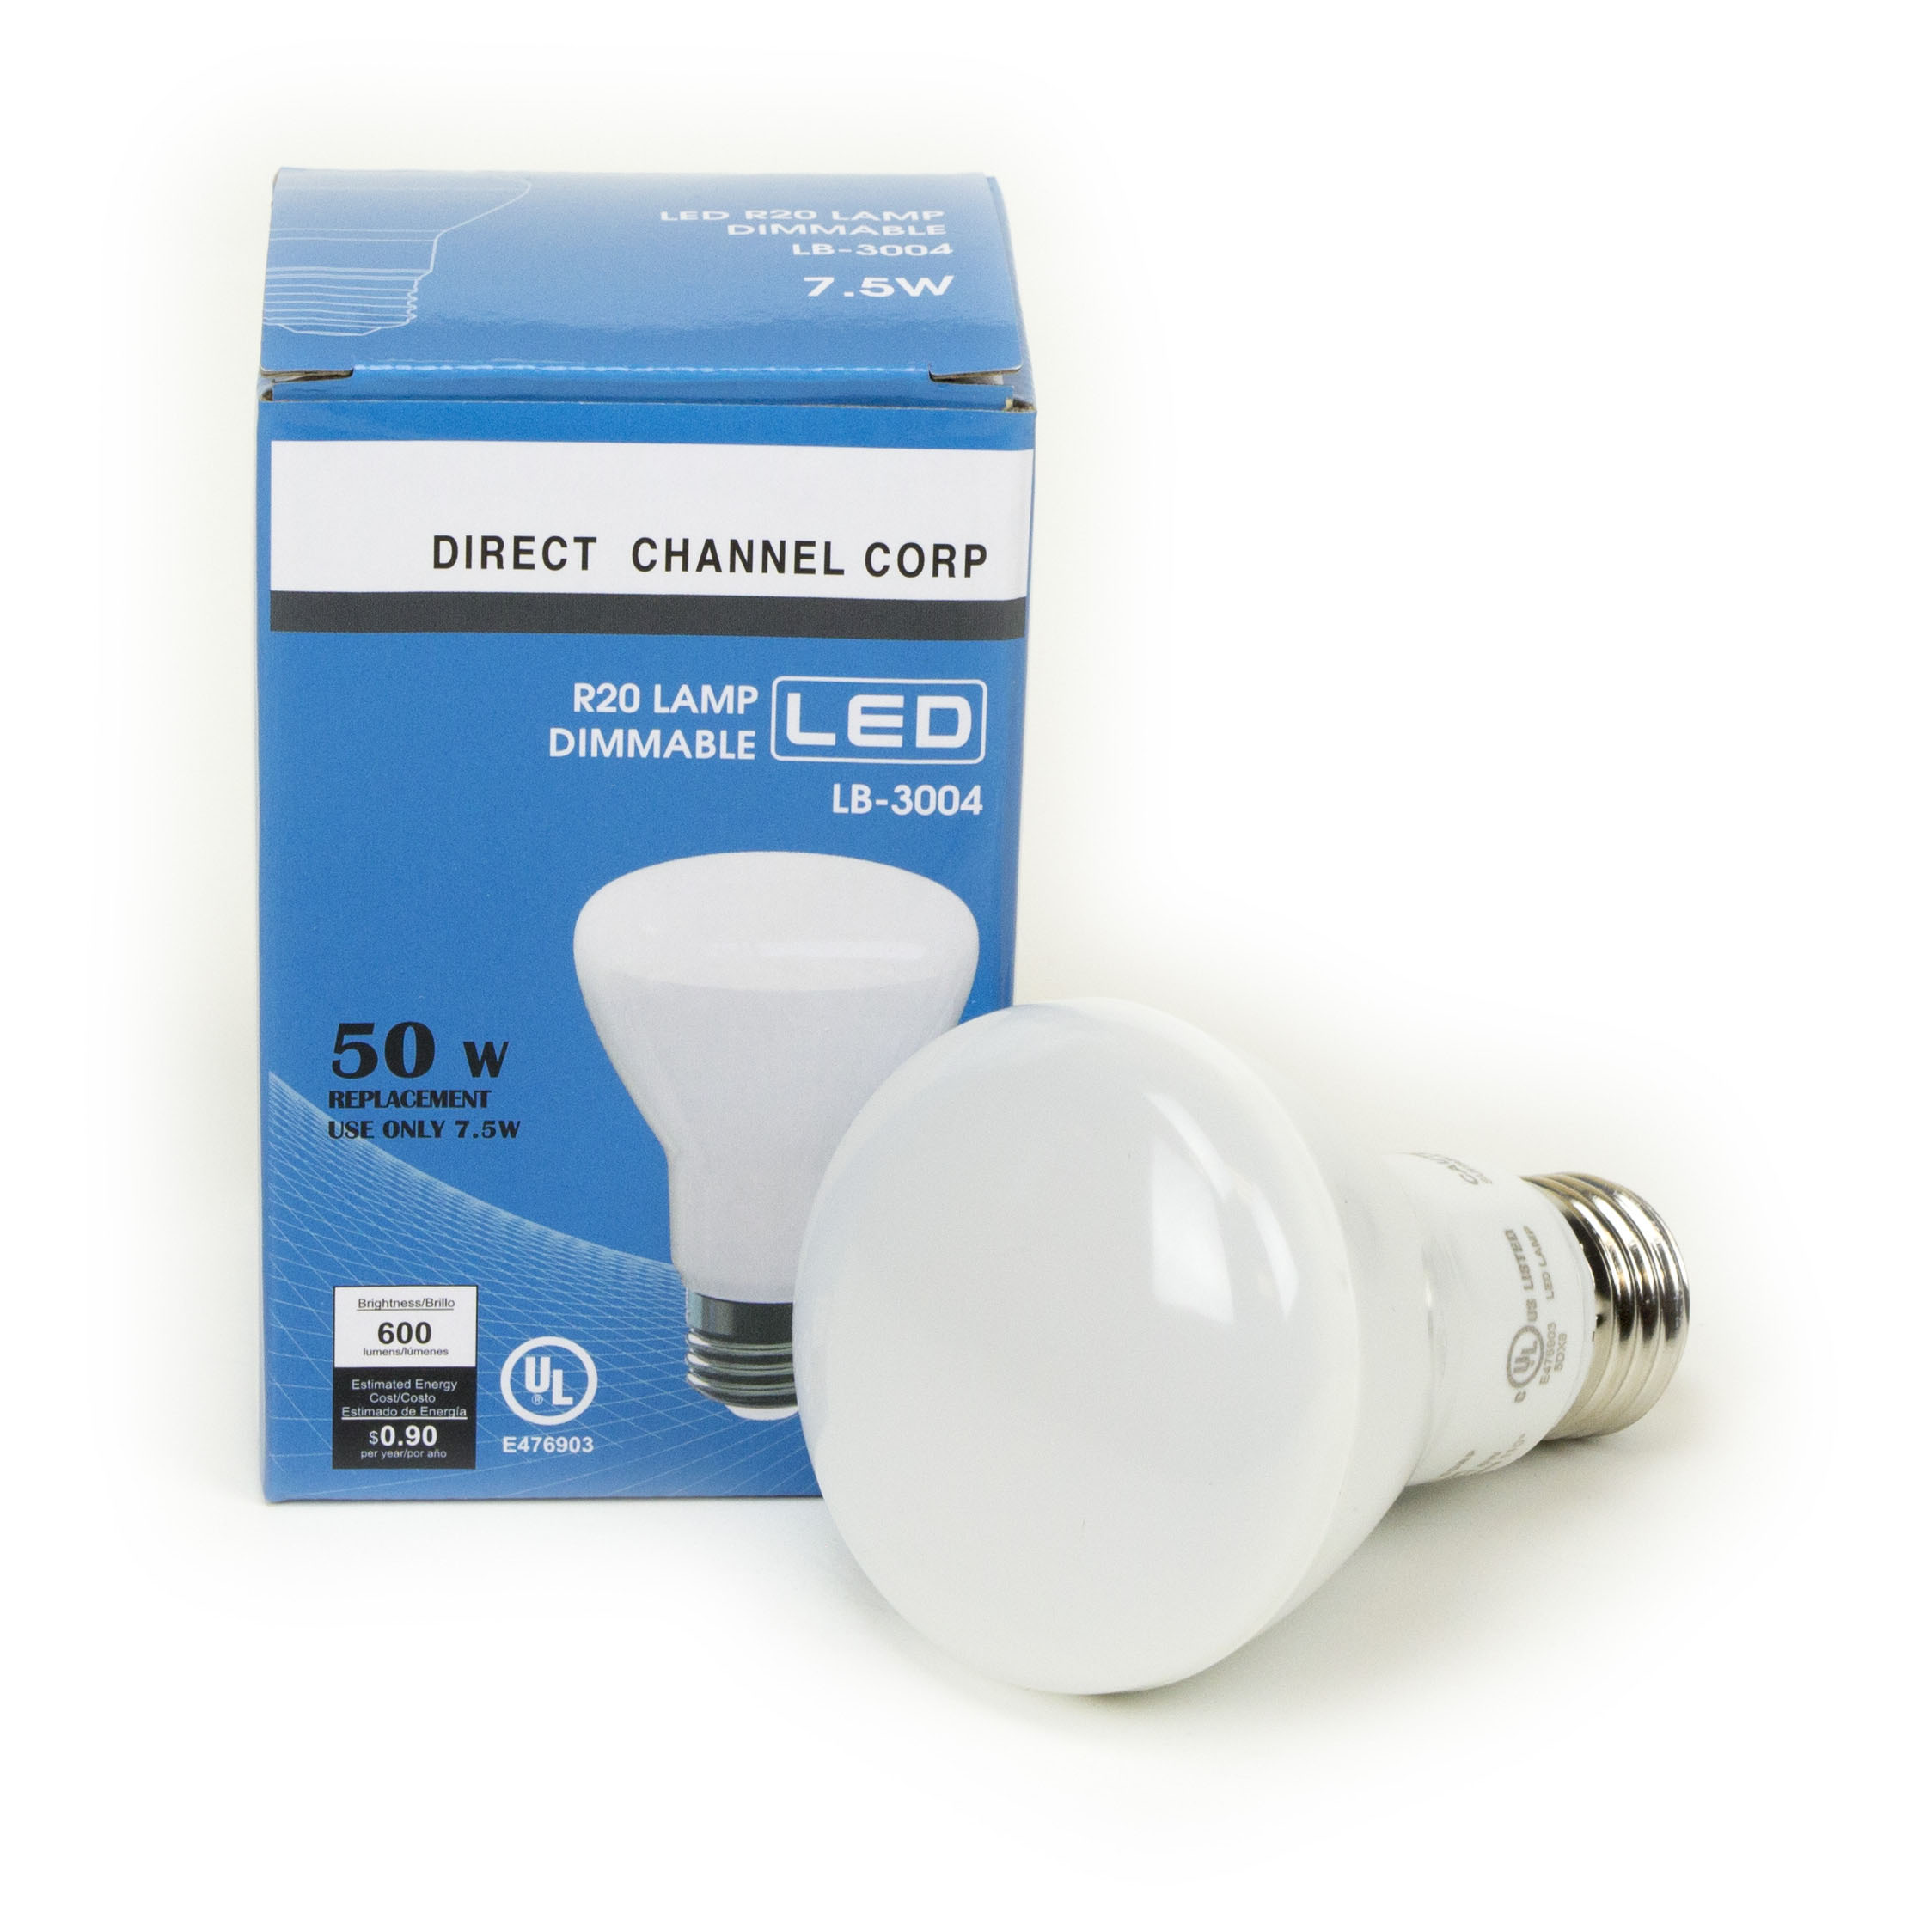 sessie dramatisch viering LED Bulbs, LED Lamp, LED Lighting. In Stock & Fast Ship. No Tax Except CA.  (888)628-8166